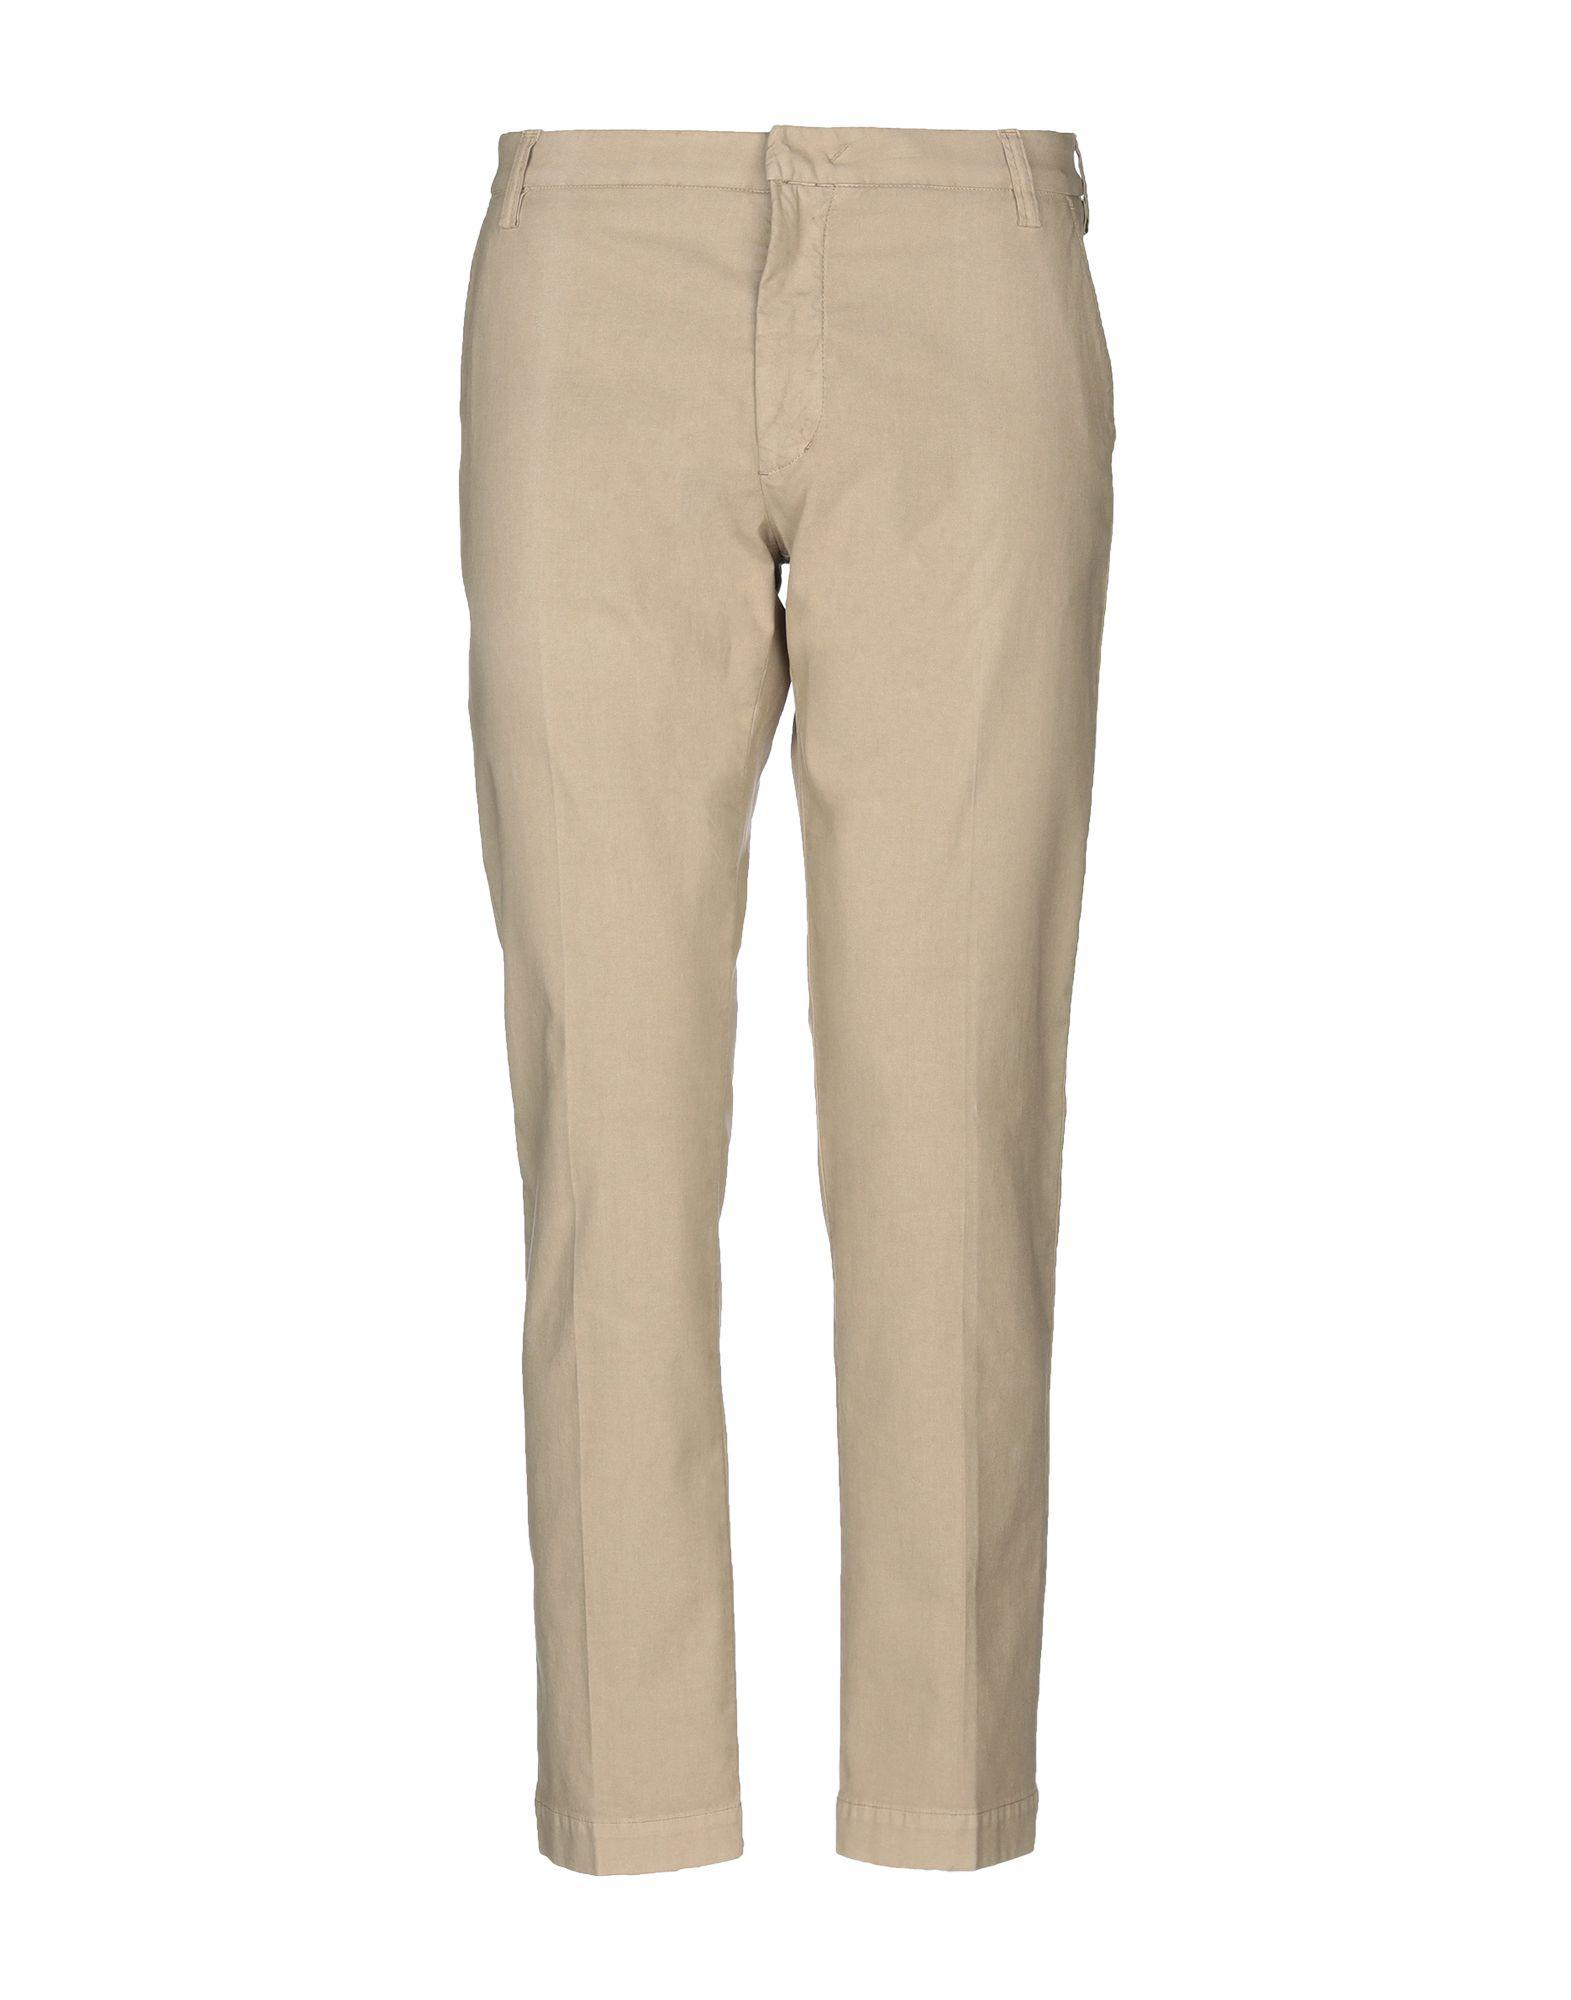 Entre Amis Cotton Casual Pants in Sand (Natural) for Men - Lyst